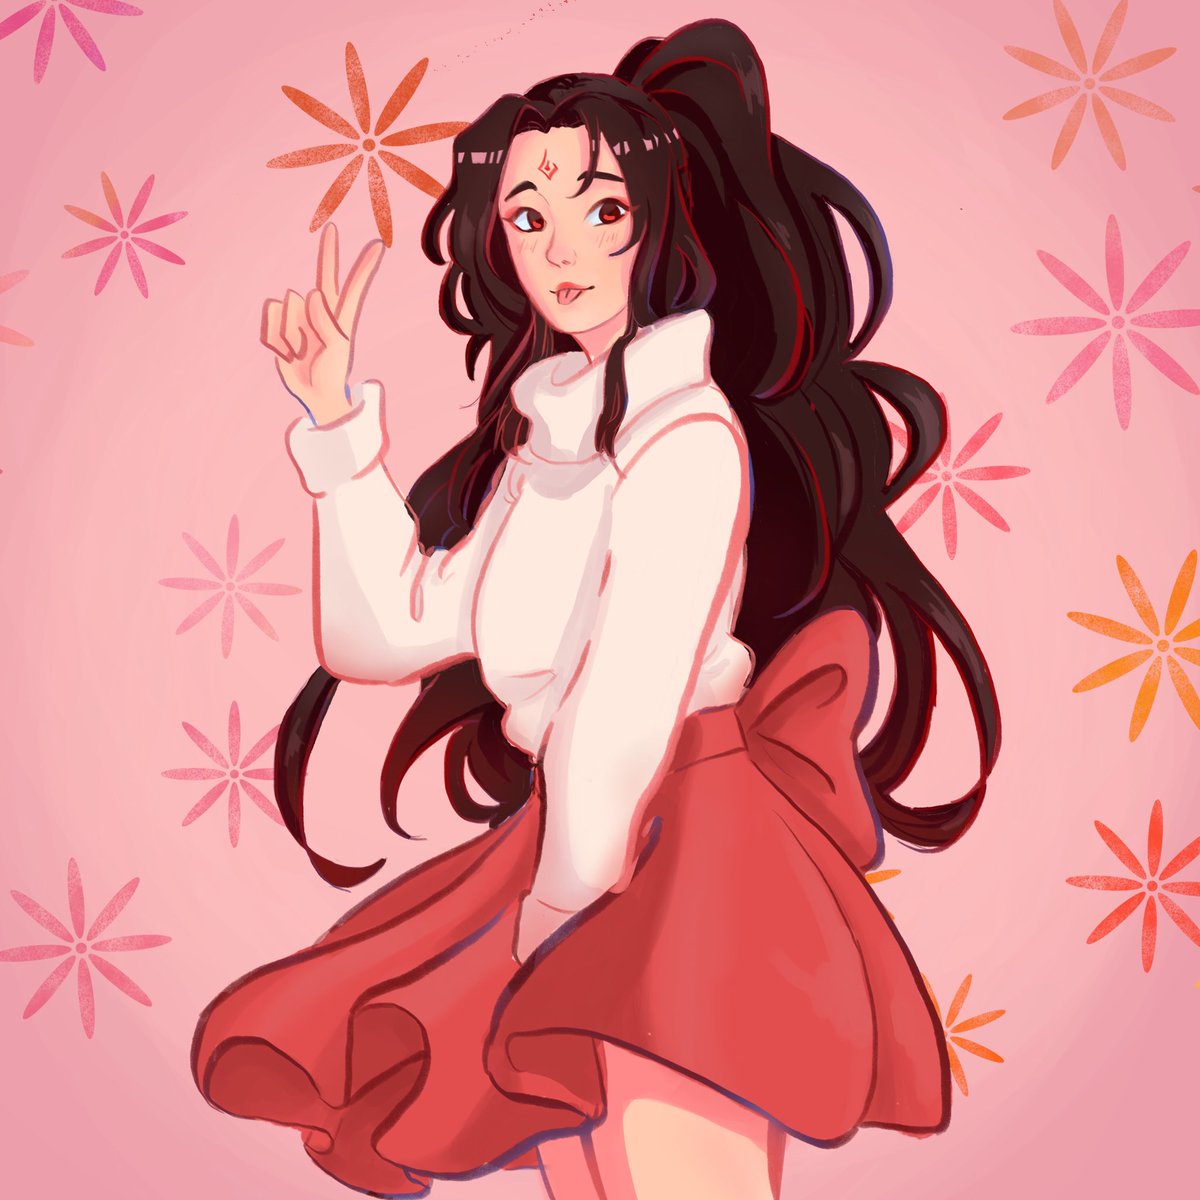 I love drawing outfits so have fem!Binghe in a skirt! Might make this into a whole fashion thread eventually #LuoBinghe